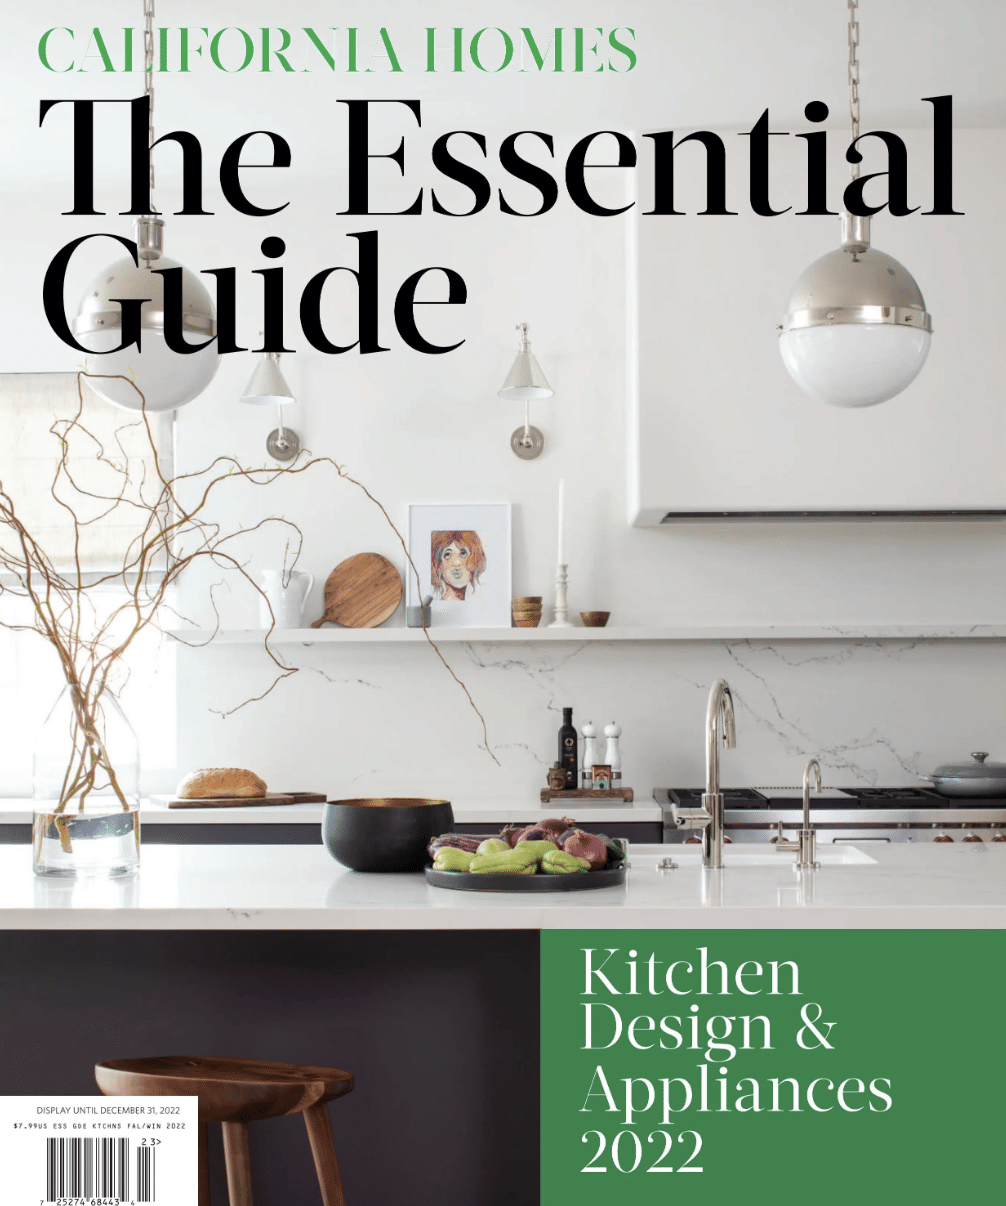 California Homes - The Essential Guide to Kitchens 2022